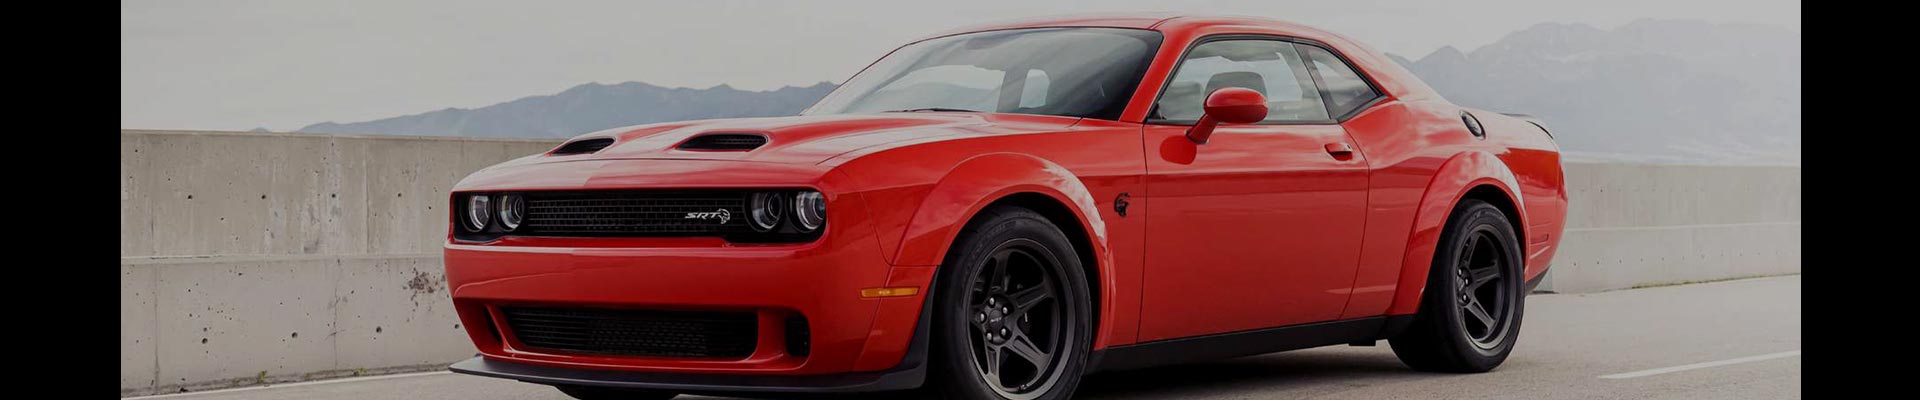 Shop Replacement and OEM 2018 Dodge Challenger Parts with Discounted Price on the Net